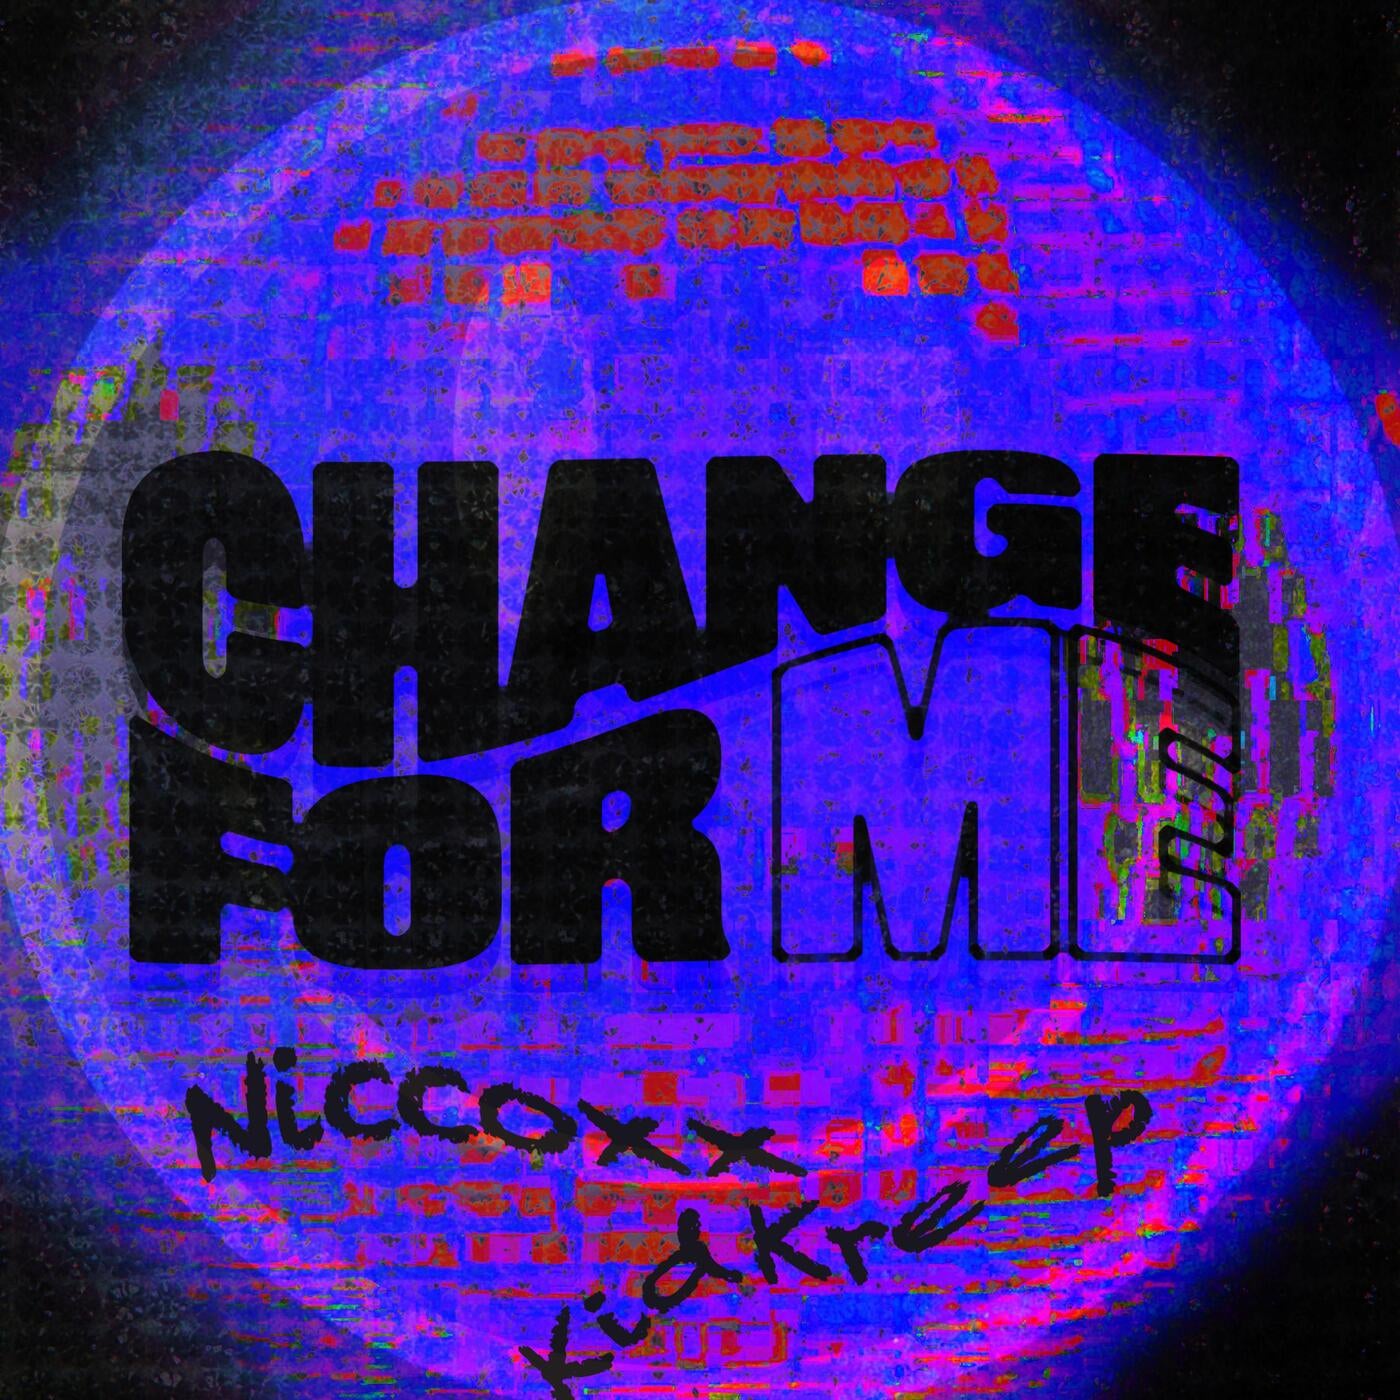 Change For Me (feat. Niccoxx)